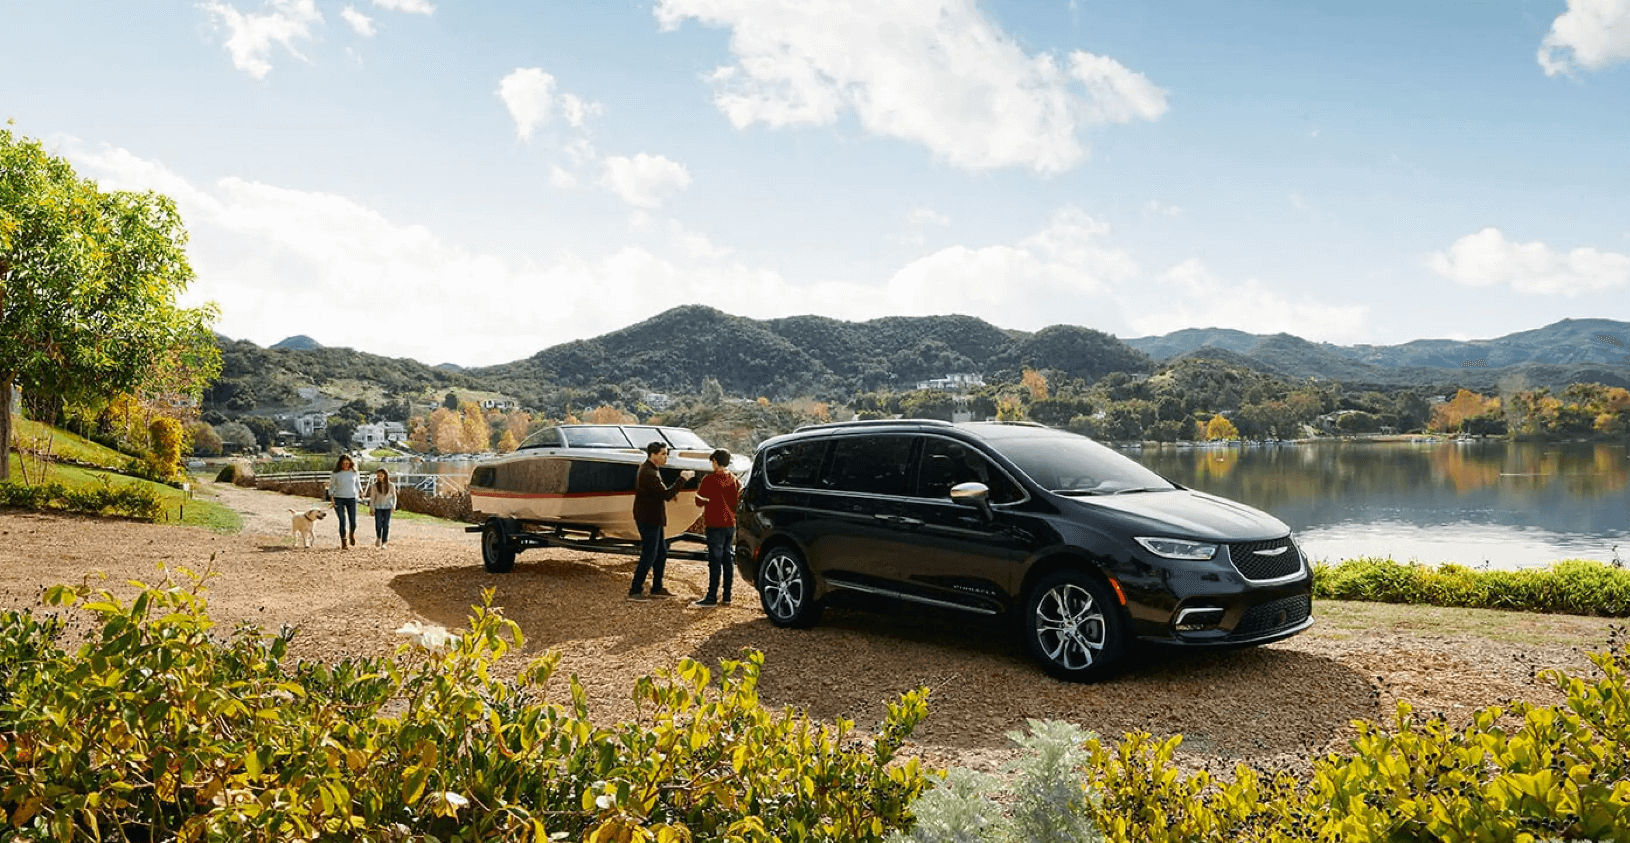 2019 Chrysler Pacifica Towing Capacity